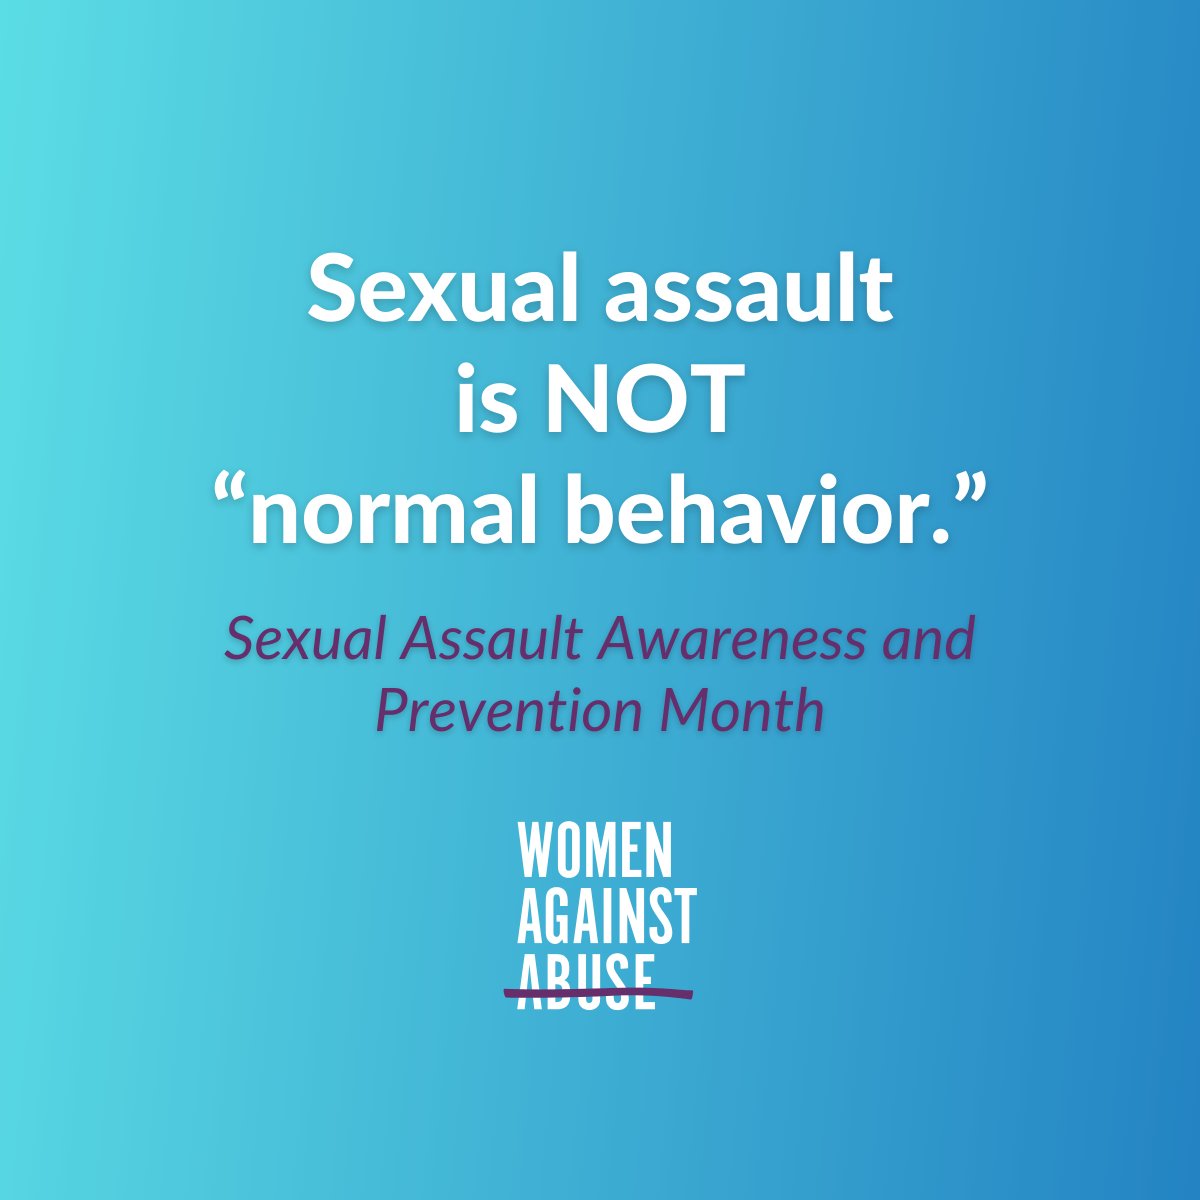 Survivors of sexual violence deserve to be believed. Dismissing sexual assault as 'normal behavior' creates a culture where survivors are afraid to speak out. If you have experienced sexual violence and need help, call @WOARphila's 24-hour crisis hotline at 215-985-3333. #SAAPM